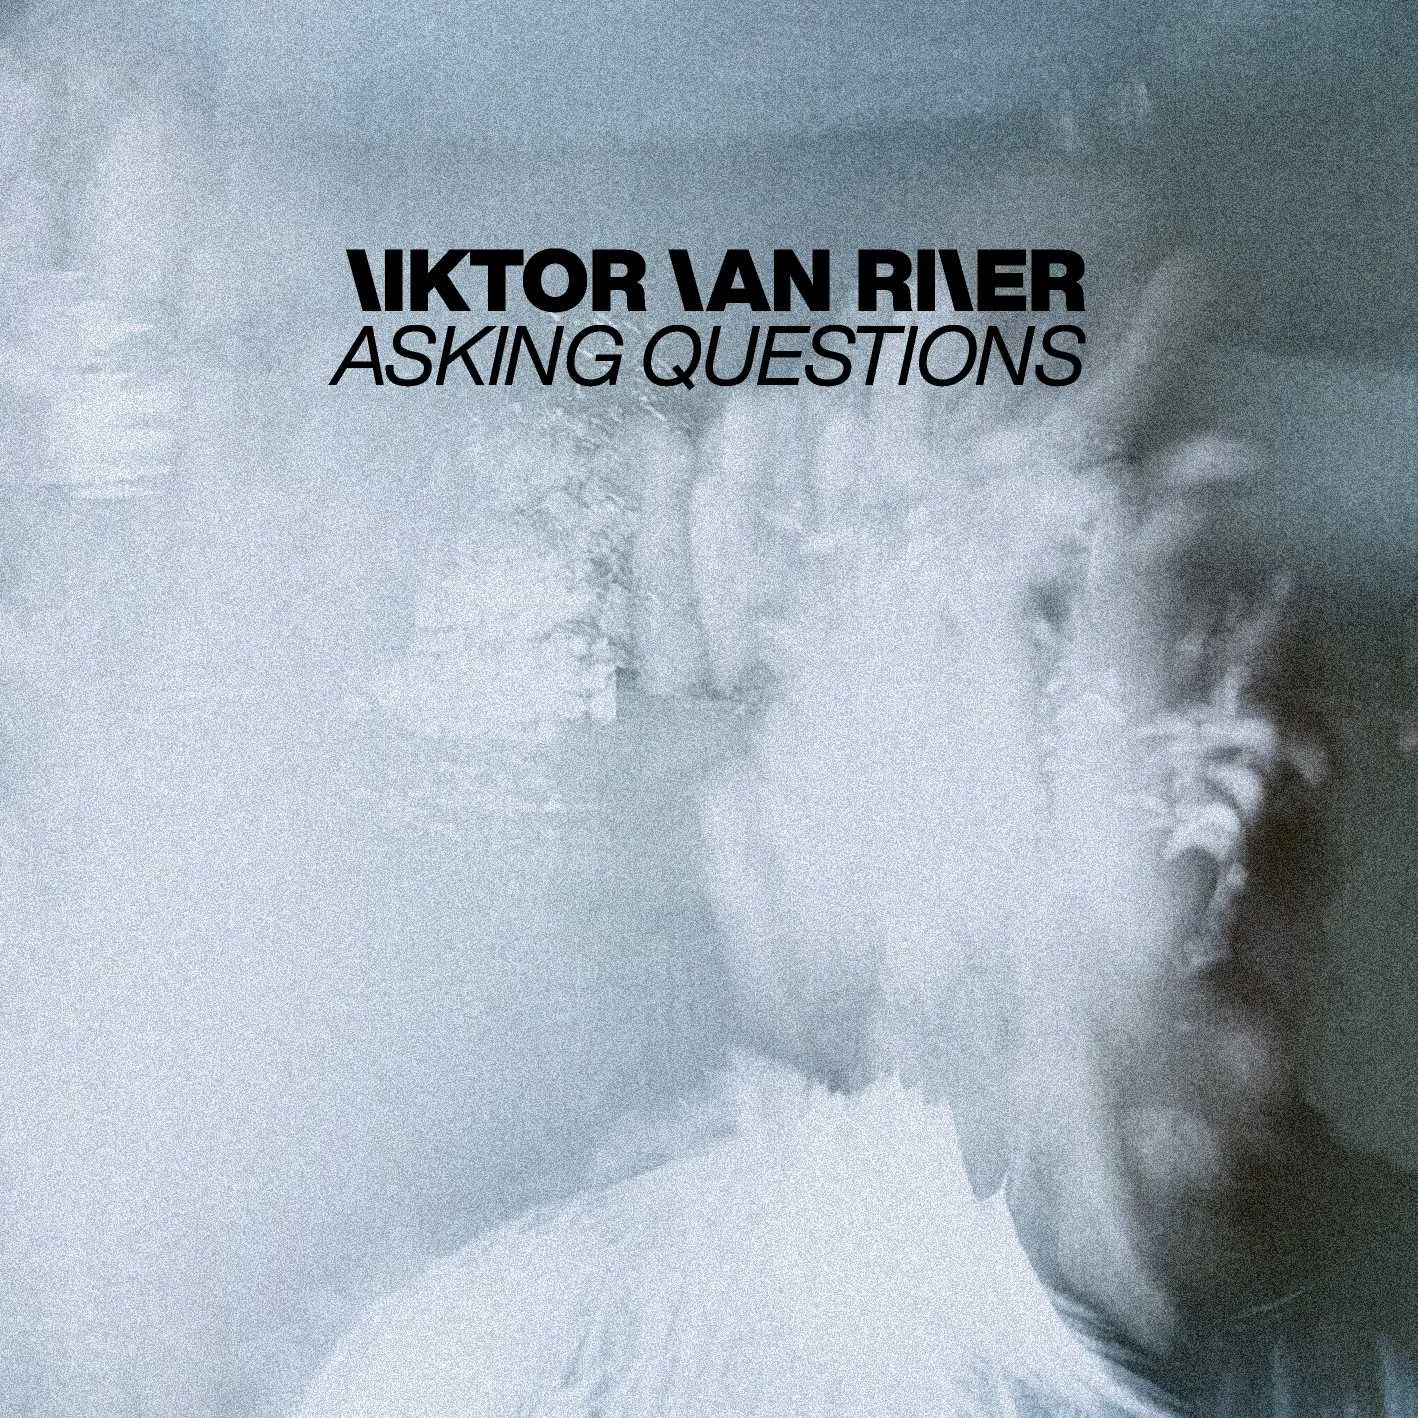 Album cover for “Asking Questions” by Viktor Van River